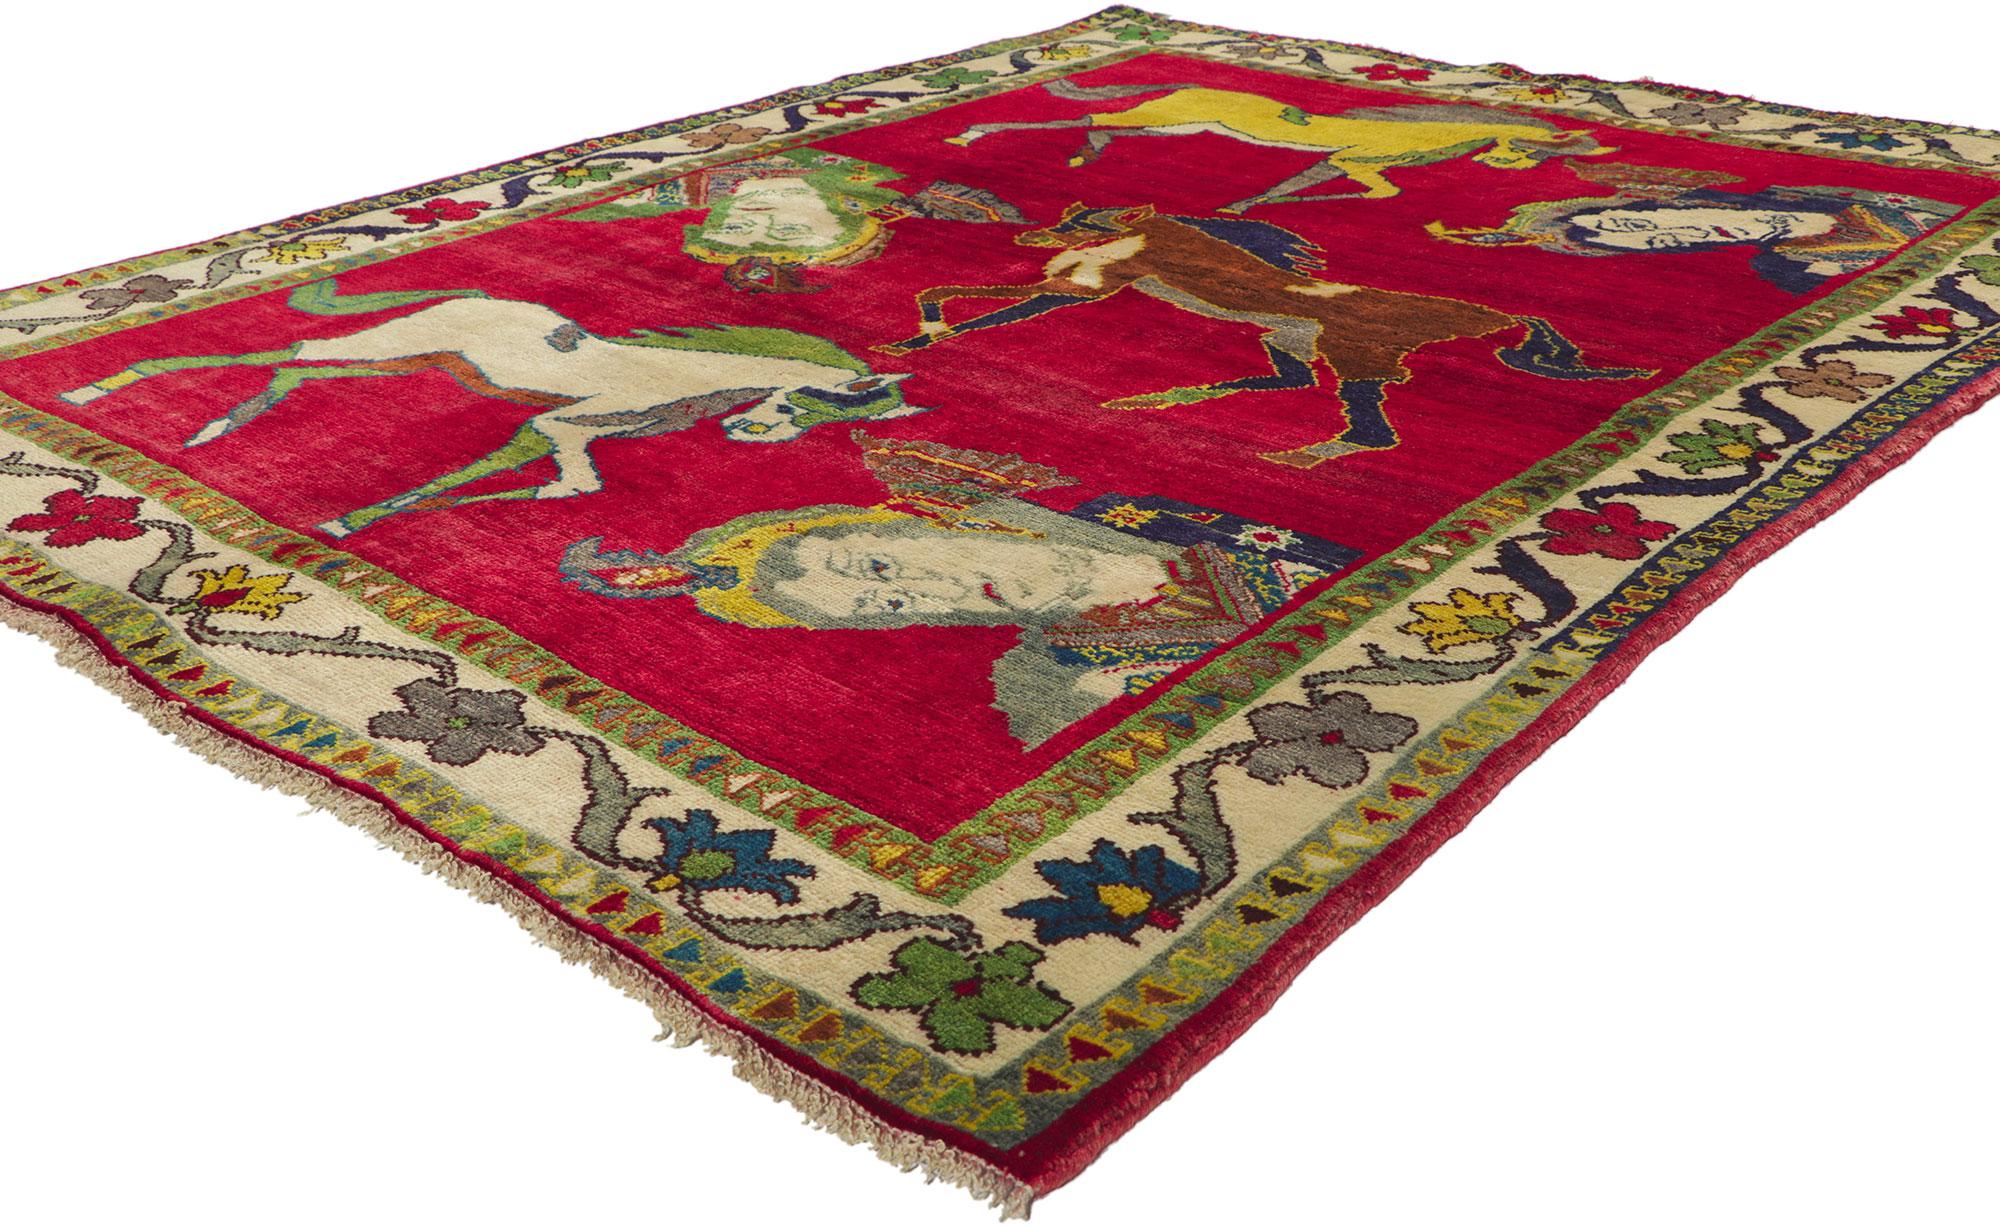 61033 Vintage Persian Shiraz Pictorial Rug, 04'11 x 06'06.
Embark on a whimsical escapade where Global Chic rendezvous with nomadic charm in this hand-knotted wool vintage Persian Shiraz rug—a tribal rug with a tale to tell and a wink to share.